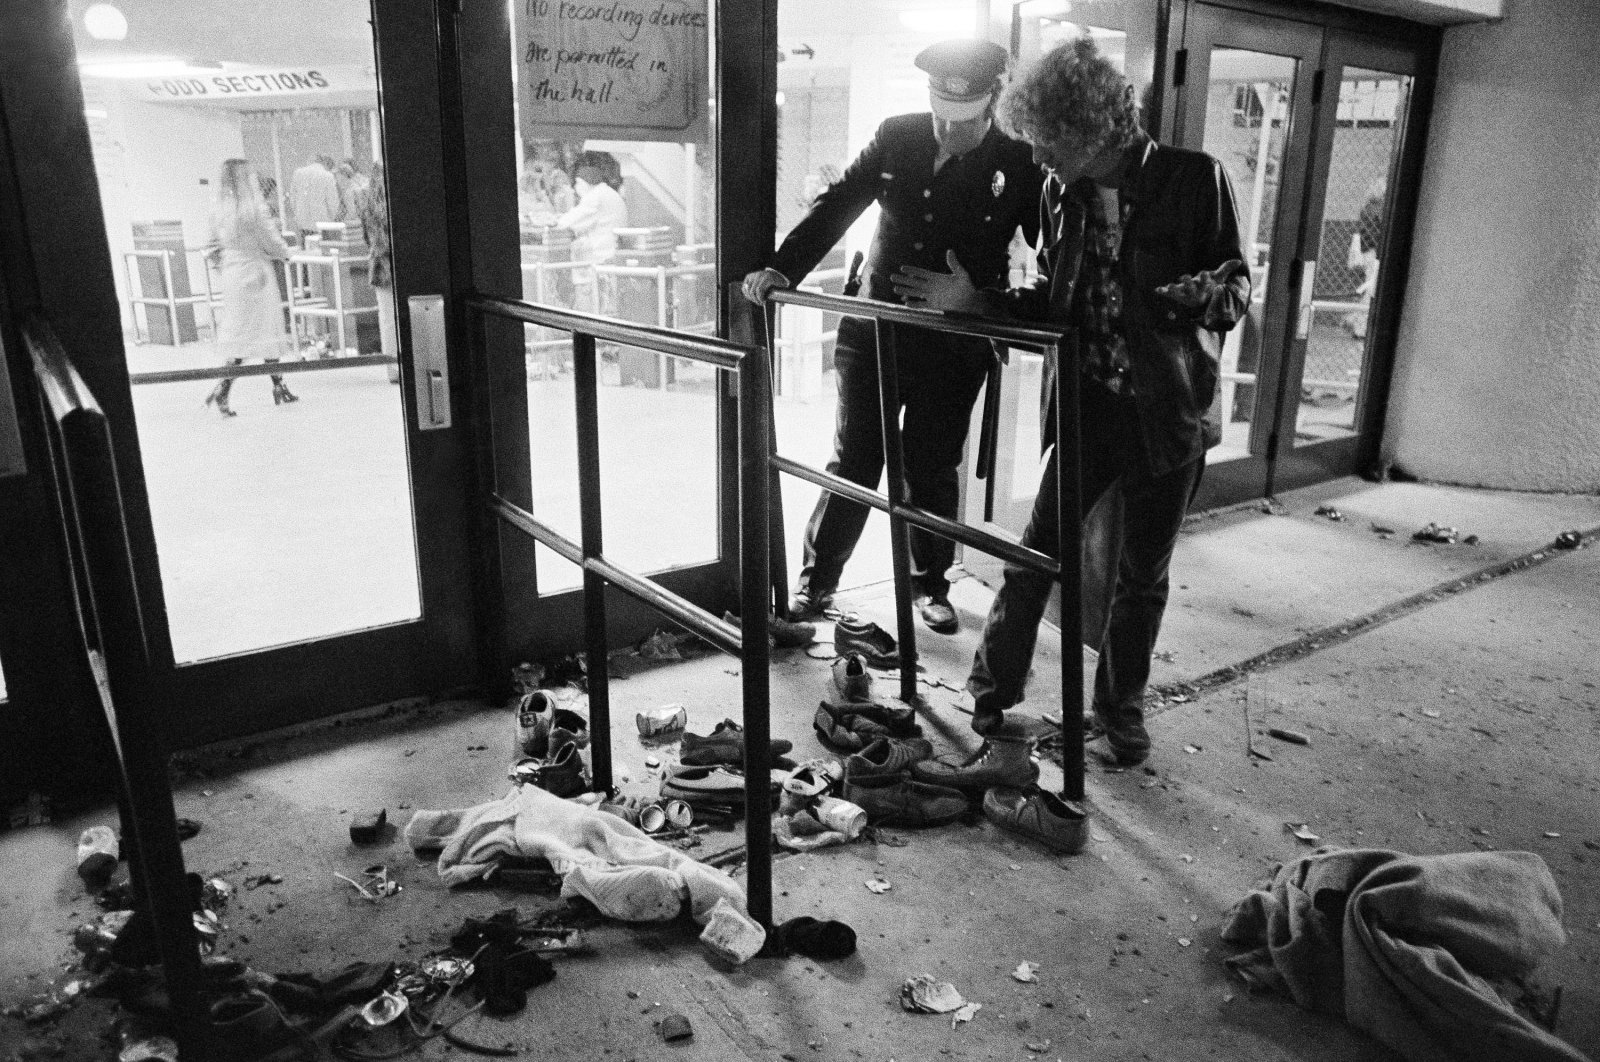 A security guard and an unidentified man look at an area where several people were killed and others injured, as they were caught in a surging crowd entering the Riverfront Coliseum for a The Who concert, in Cincinnati, United States, Dec. 3, 1979. (AP Photo)